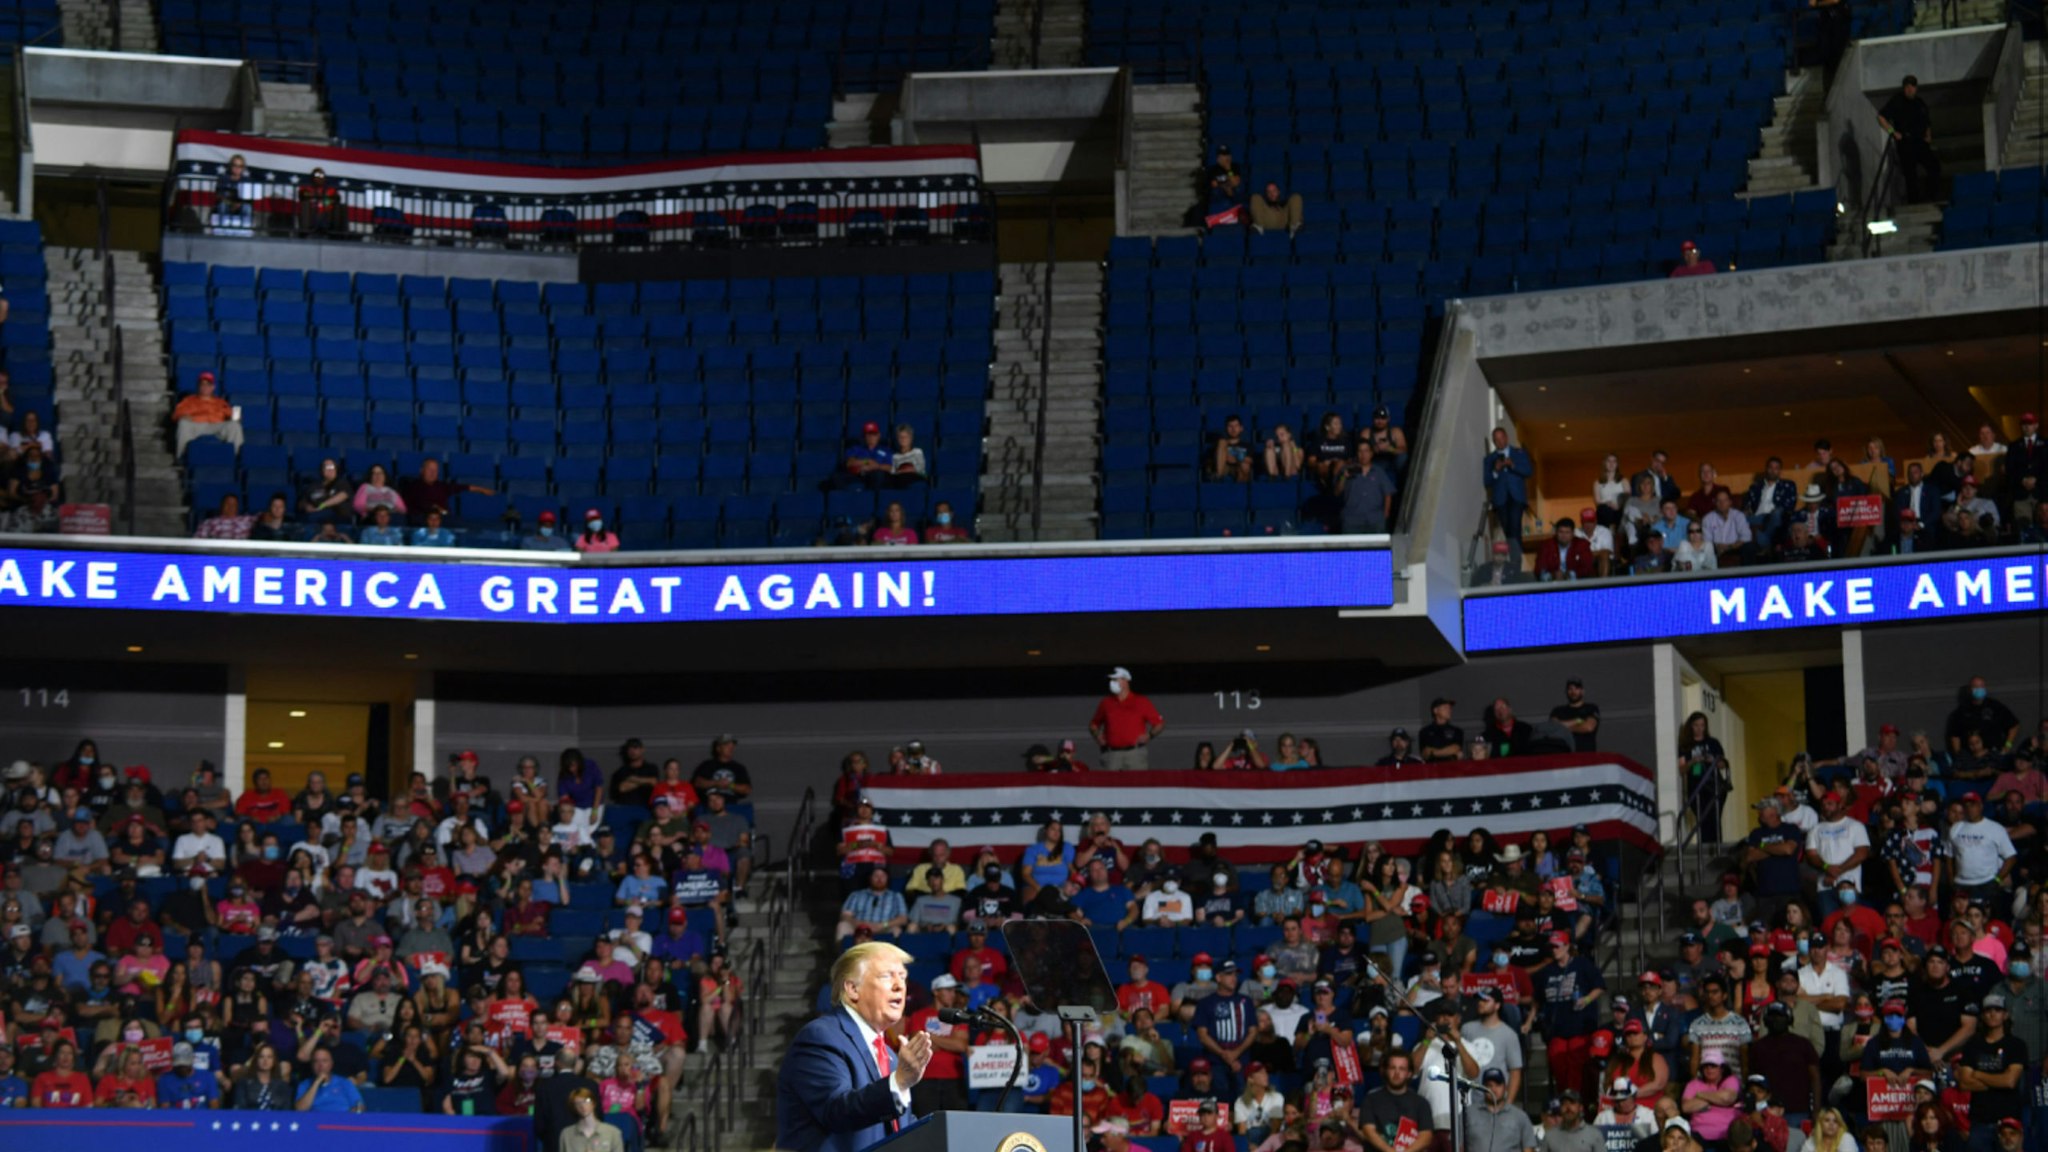 The upper section of the arena is seen partially empty as US President Donald Trump speaks during a campaign rally at the BOK Center on June 20, 2020 in Tulsa, Oklahoma.